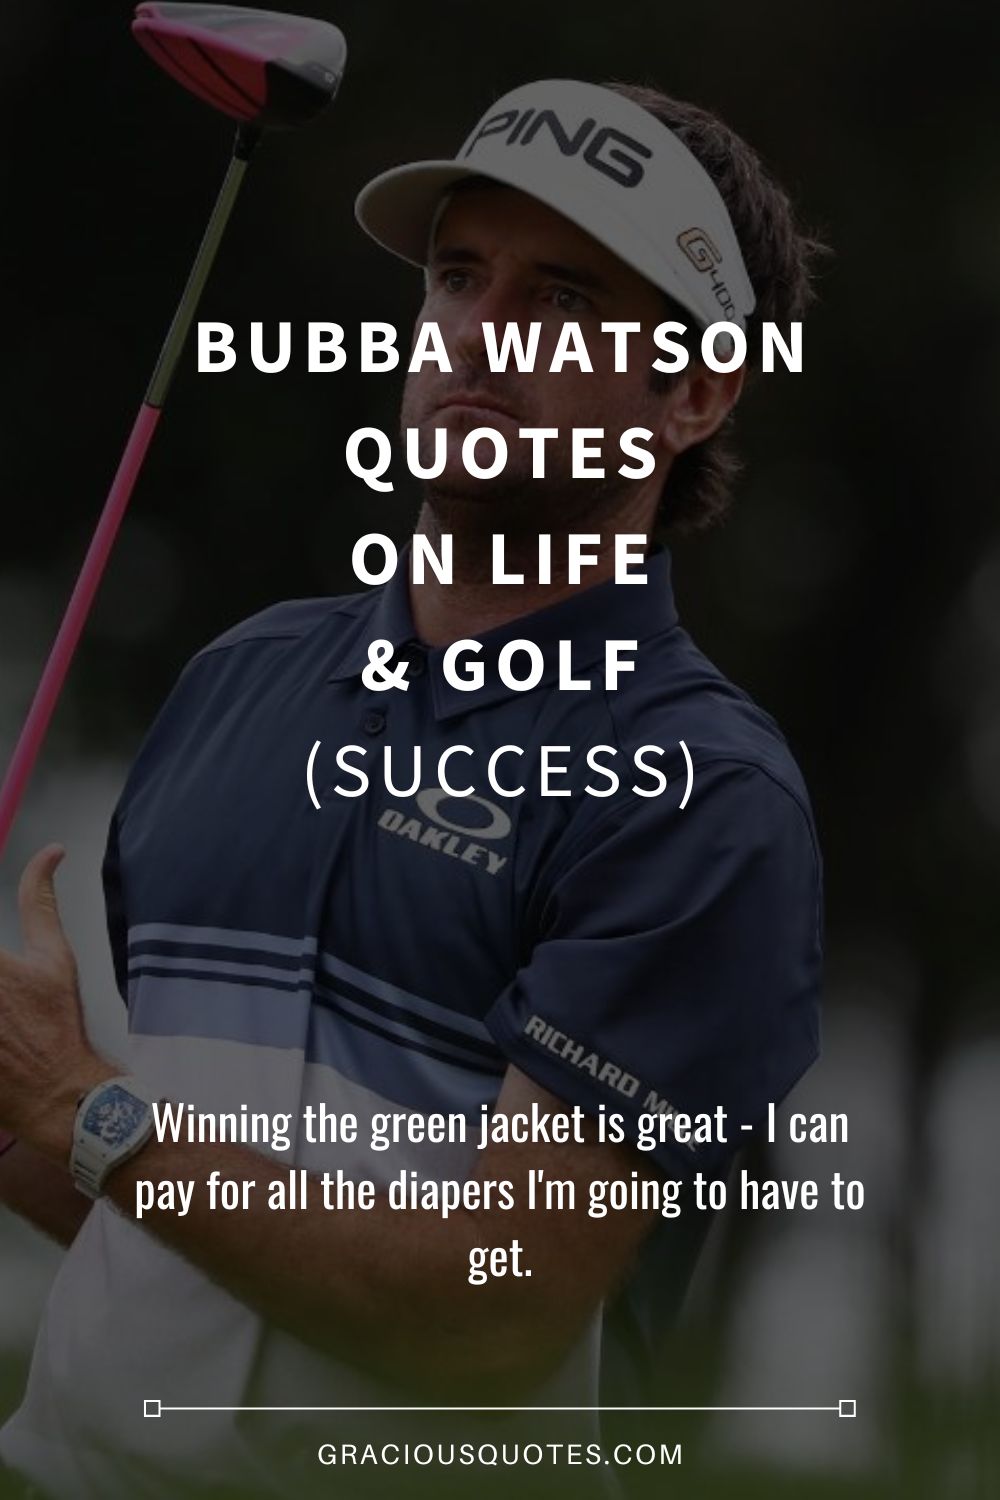 Bubba Watson Quotes on Life & Golf (SUCCESS) - Gracious Quotes